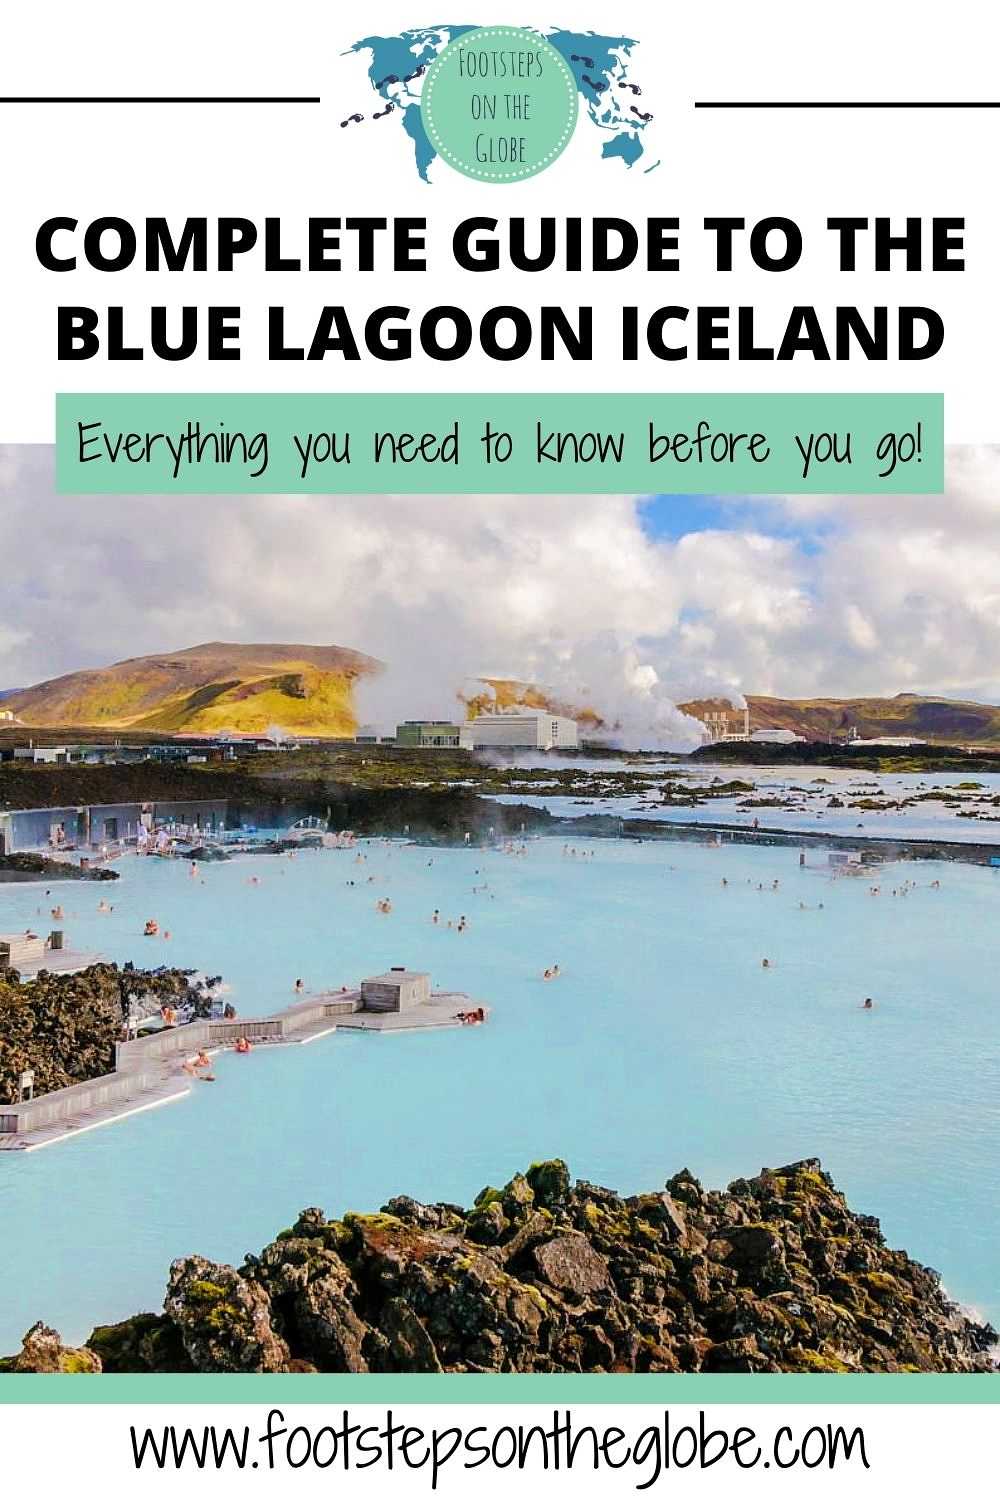 Pinterest image of the Blue Lagoon in Iceland with the text: "Complete guide to the Blue Lagoon Iceland - everything you need to know before you go!"